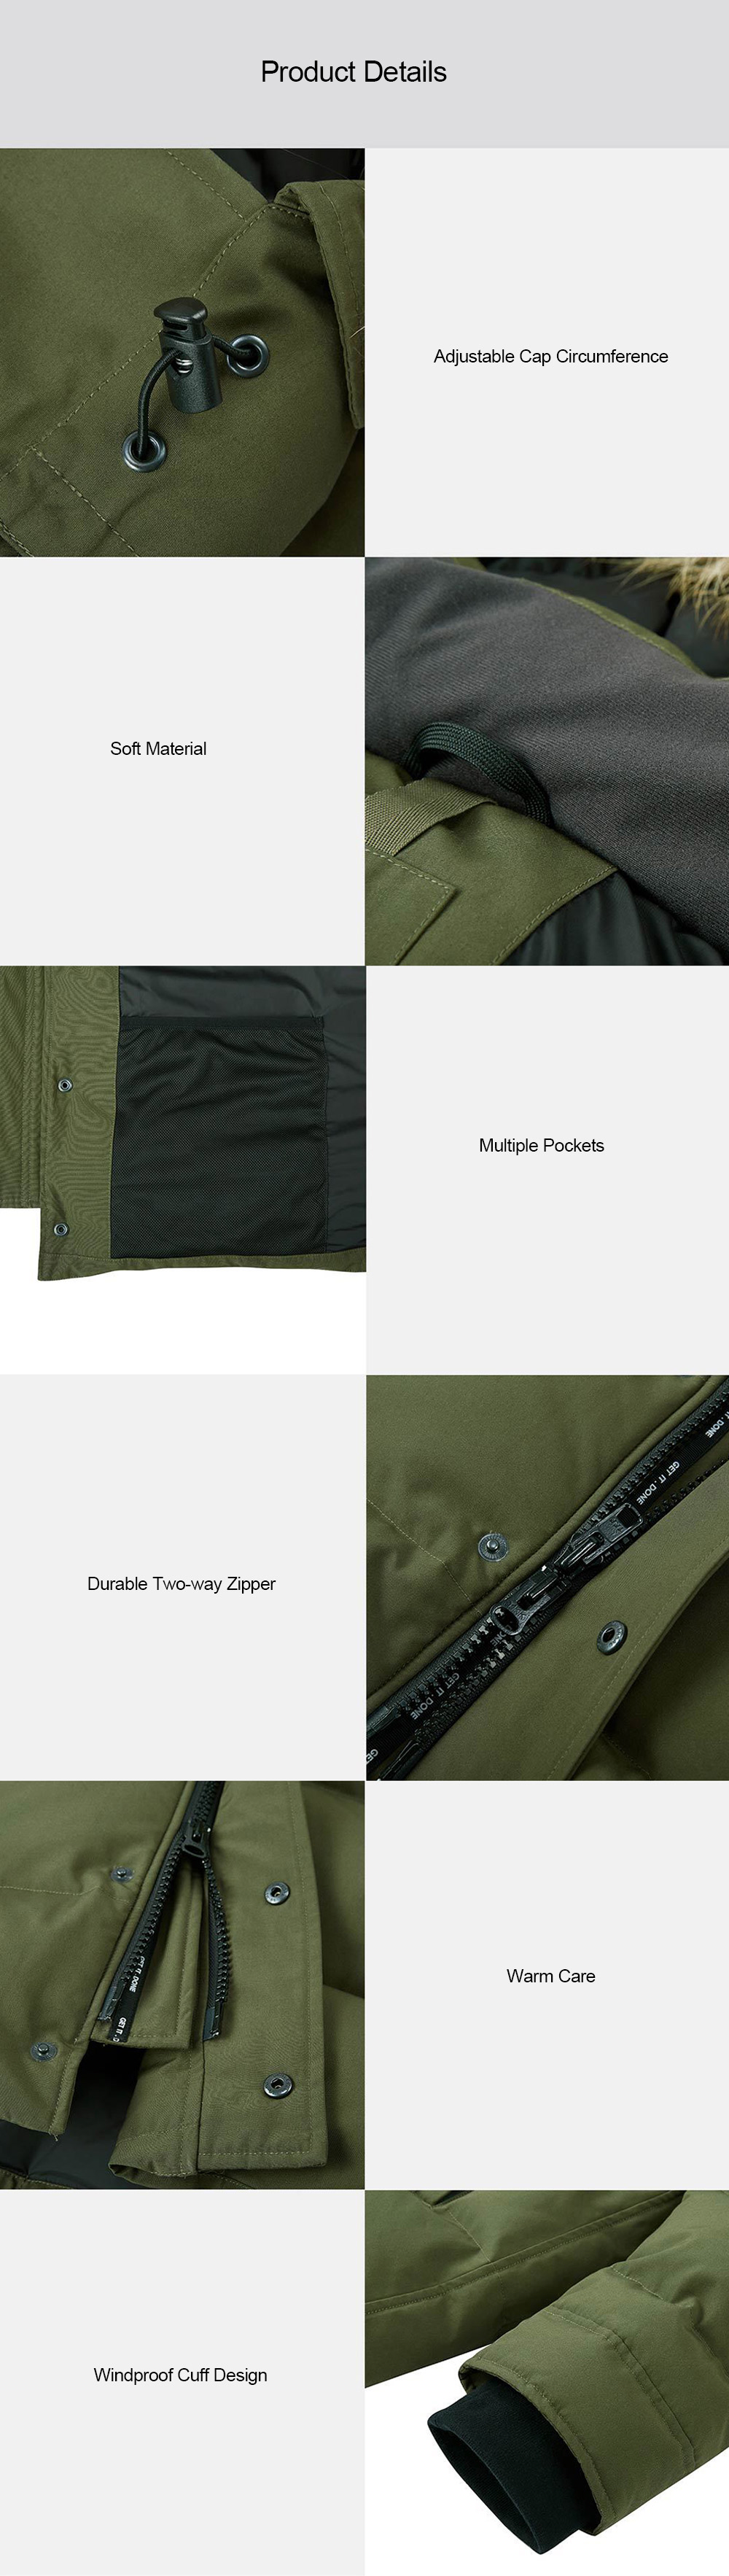 MITOWN LIFE Extreme Exploration Down Jacket from Xiaomi Youpin